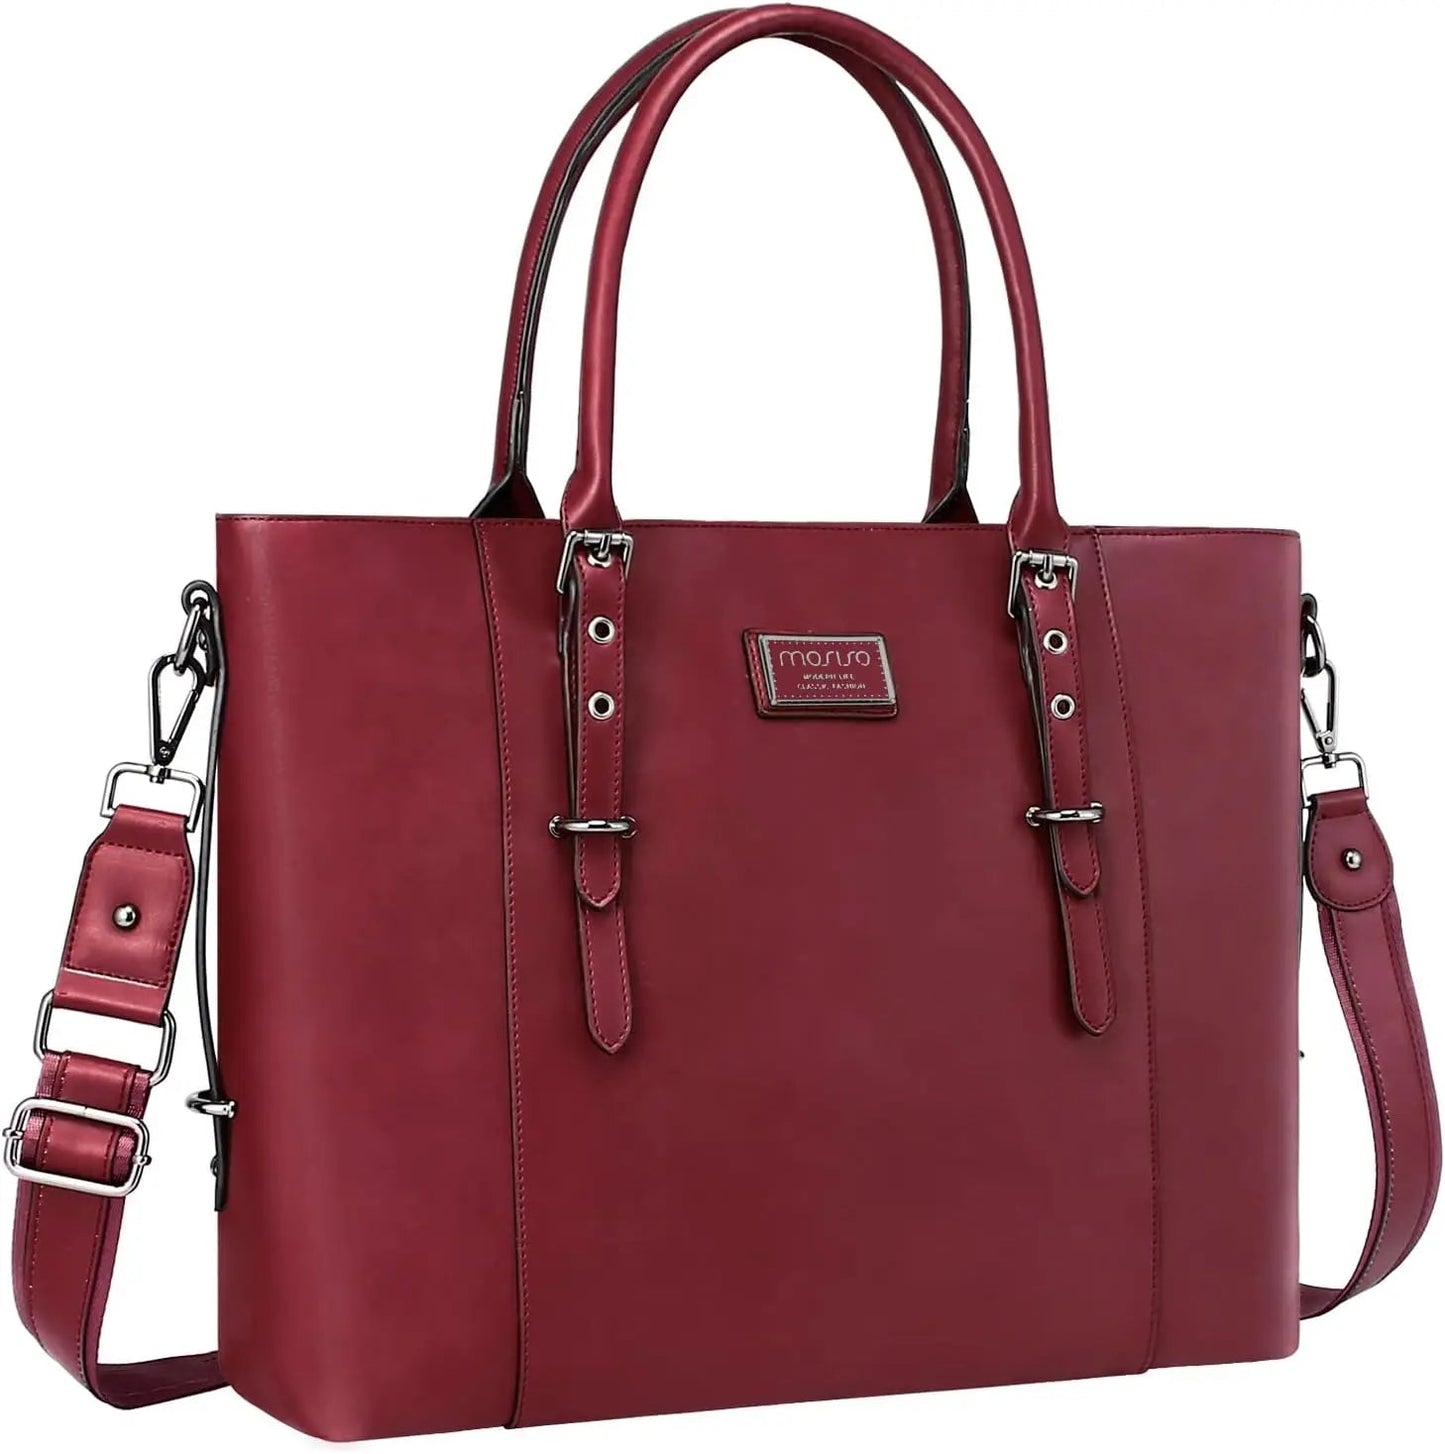 Women's 17 inch Laptop Tote The Store Bags Wine Red 17.3 inch 